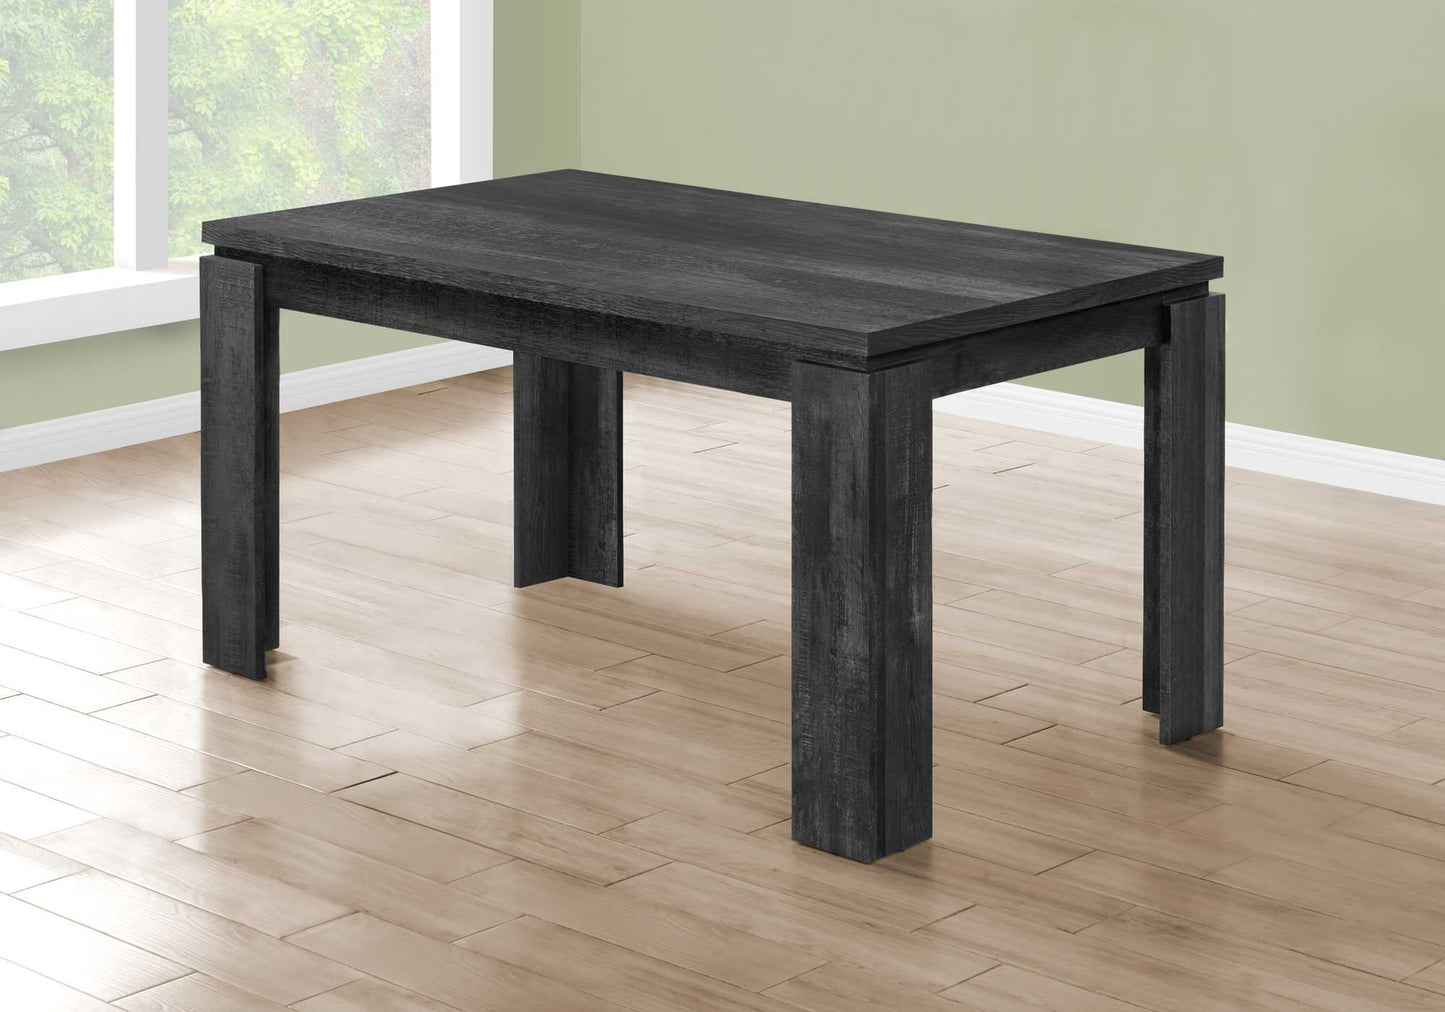 35.5" x 59" x 30.5" Black Reclaimed Wood Look  Dining Table-1